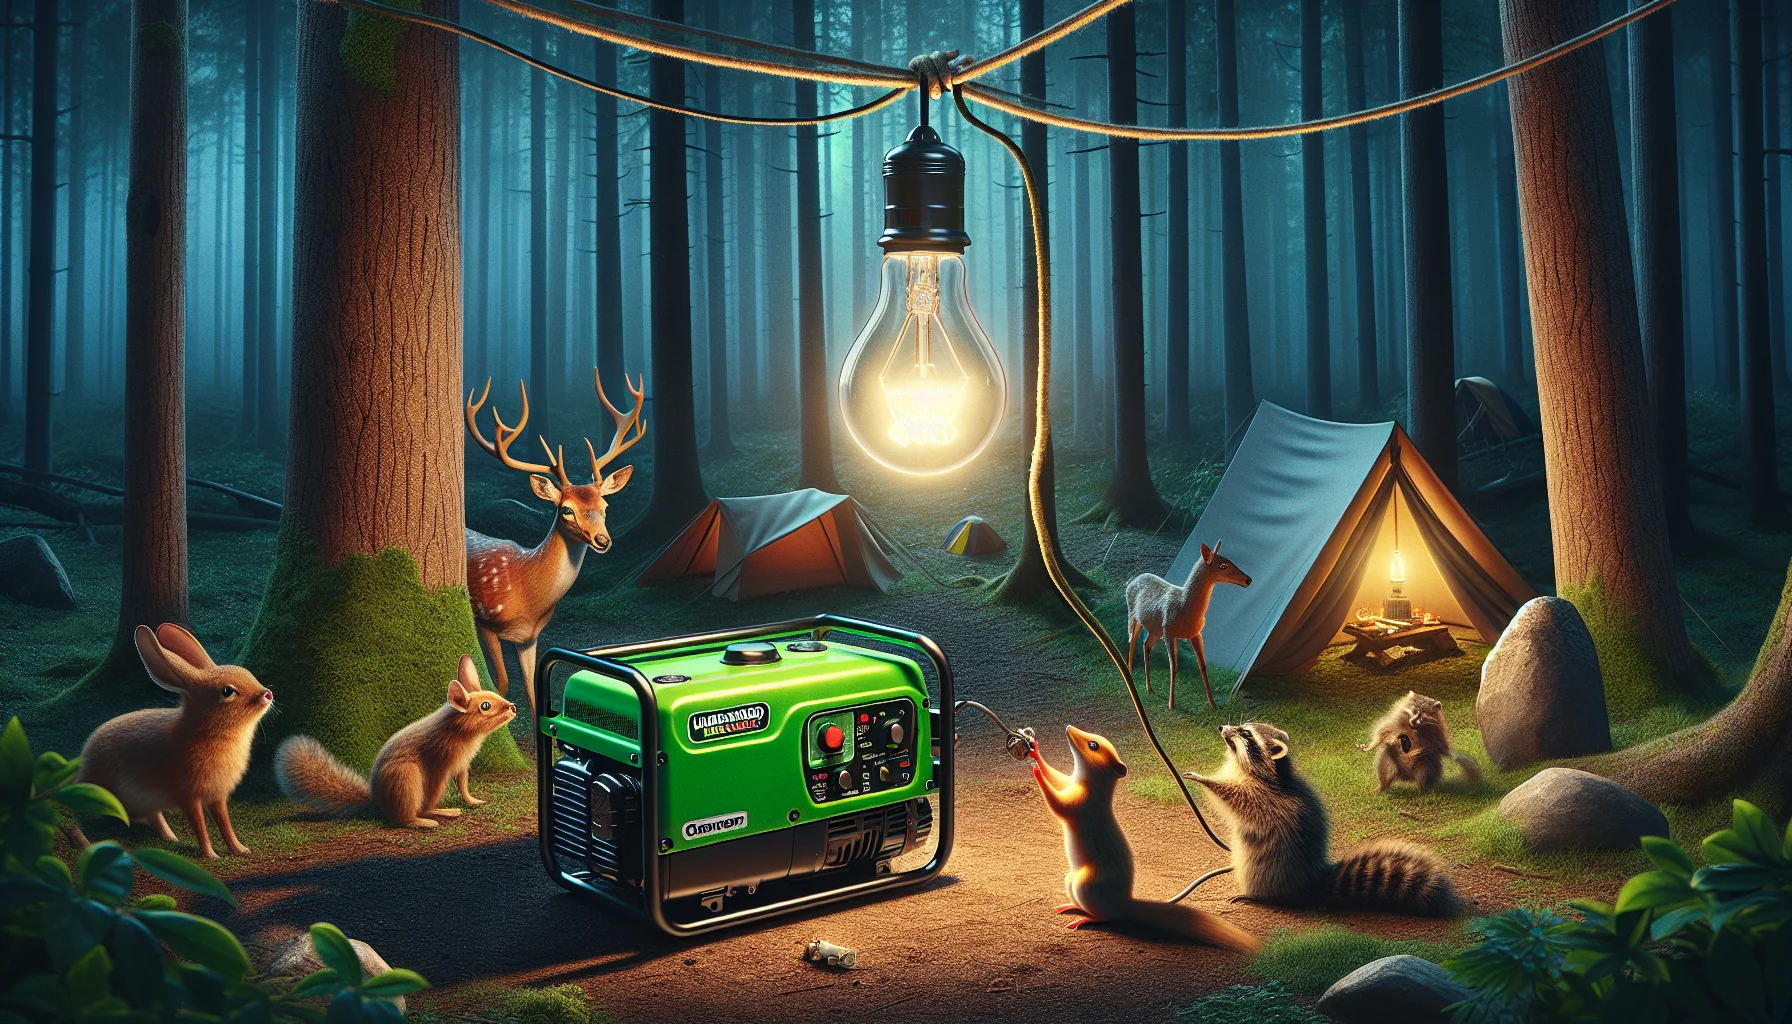 Envision a humorous scenario presenting an unbranded portable generator's effectiveness. The scene unfolds in a campsite located in a dense forest. A traditionally powered lightbulb is hanging from a tree with a thin rope, mysteriously glowing in the twilight. Several forest creatures, including a deer and raccoon, stand in astonishment, while a chipmunk reaches for a miniature switch connected to the bulb, suggesting that it has figured out the source of the magic. The generator, painted vibrant green, sits nearby, fueling this unexpected spectacle, and prompting a chuckle from anyone observing the scene, thus showcasing the allure of portable electricity generation.